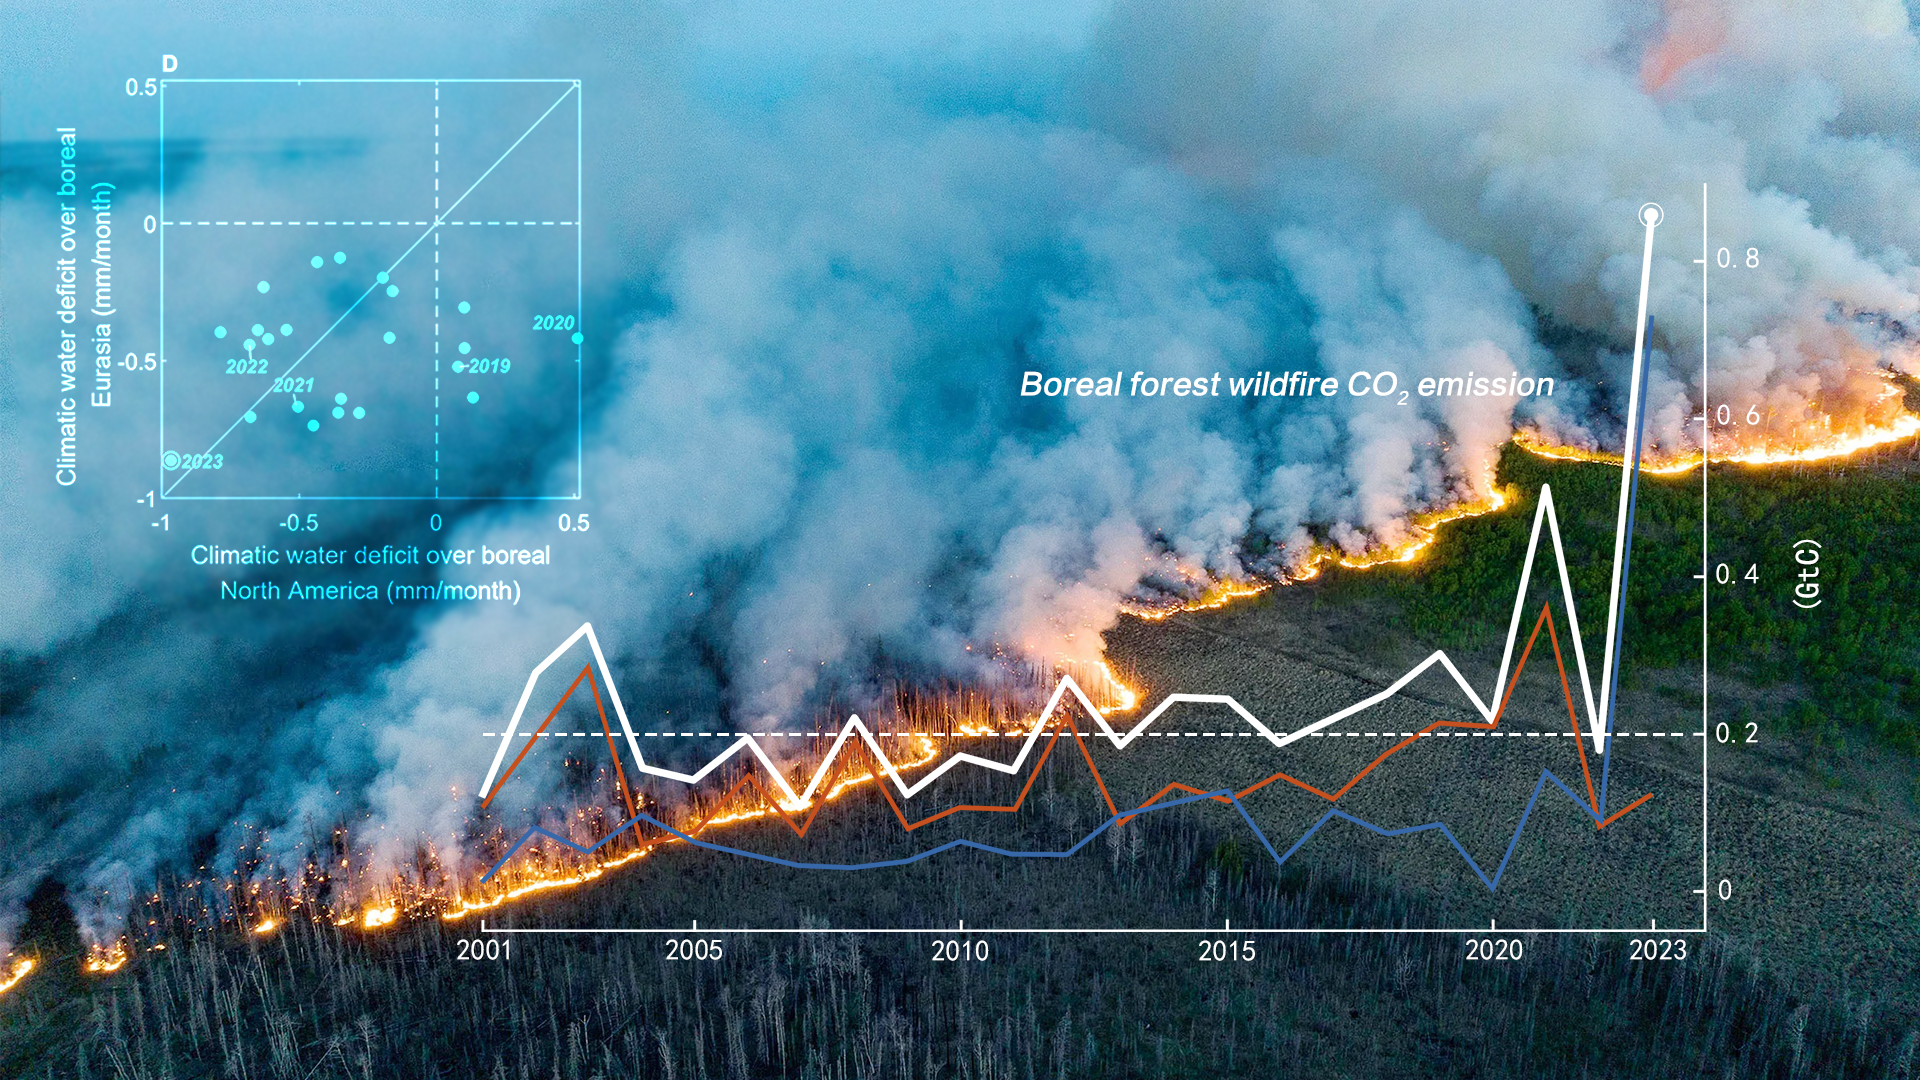 Researchers reveal climate extremes cause record-breaking wildfire emission in boreal forest in 2023